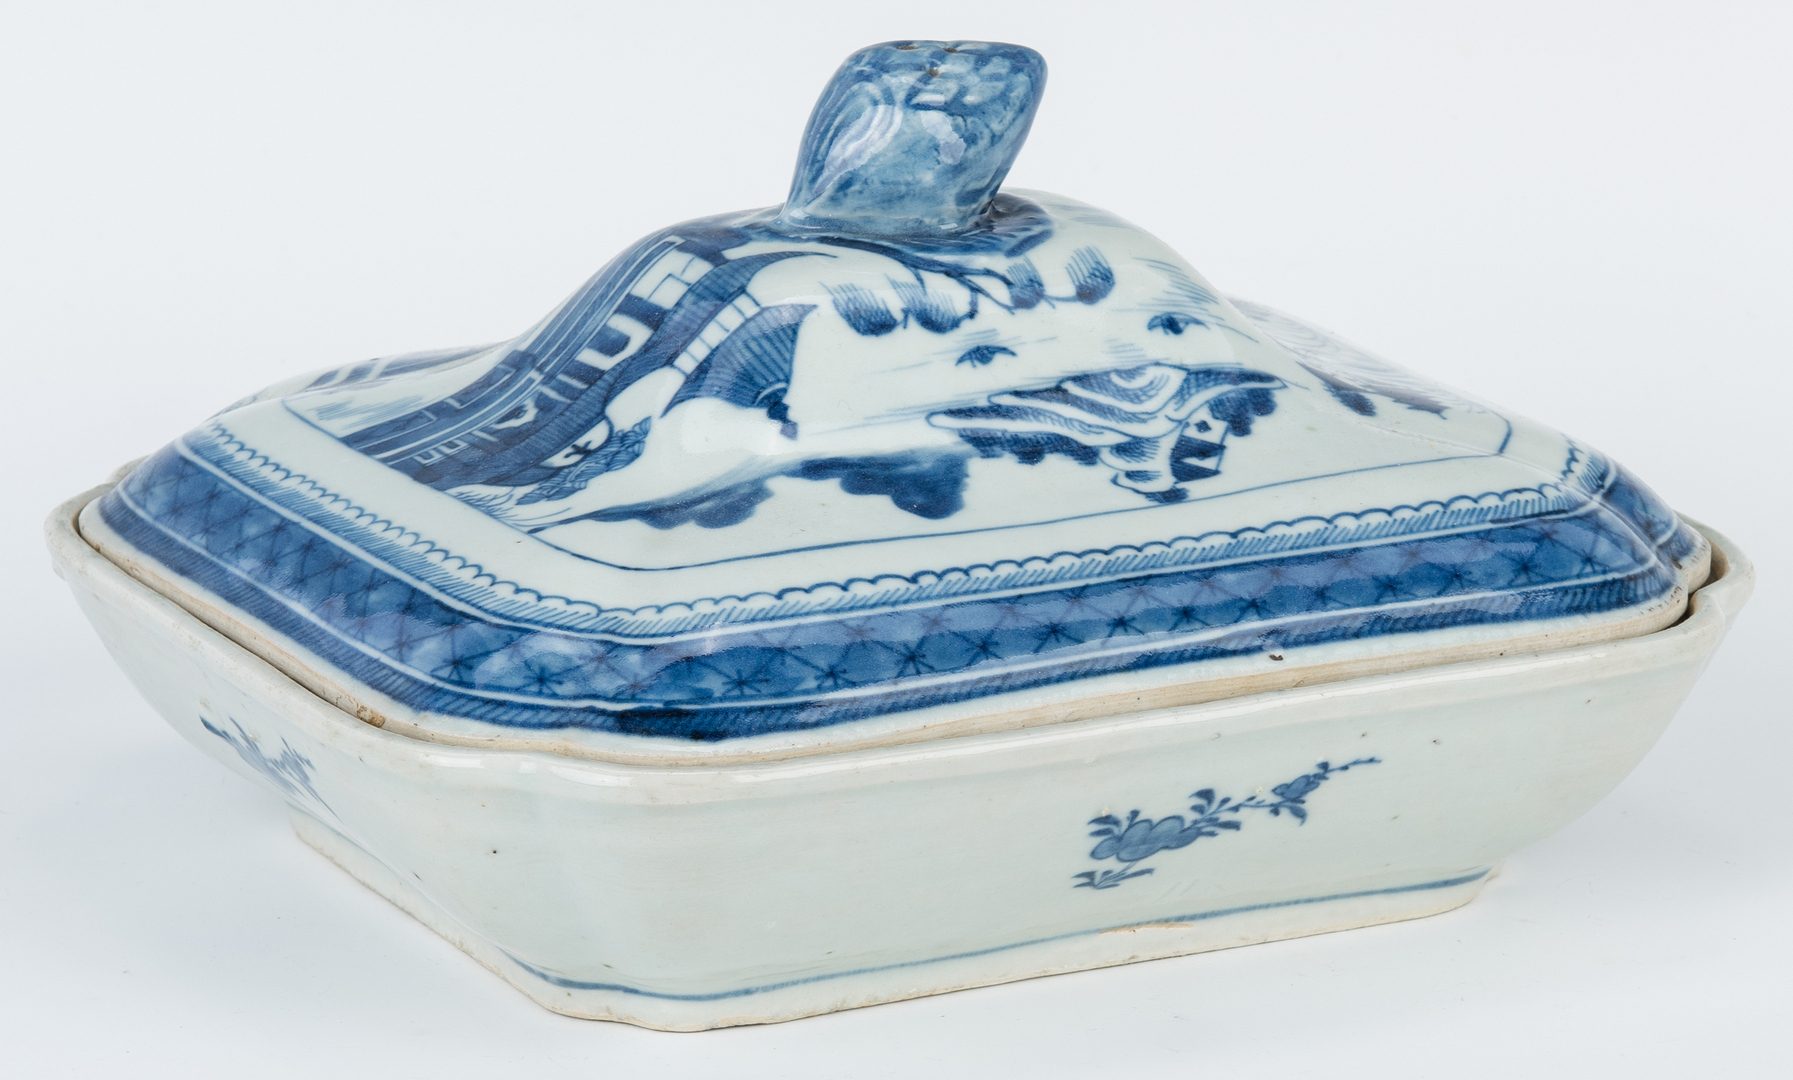 Lot 237: Chinese Tang Style Bronze Horse & Canton Porcelain Tureen, 2 items